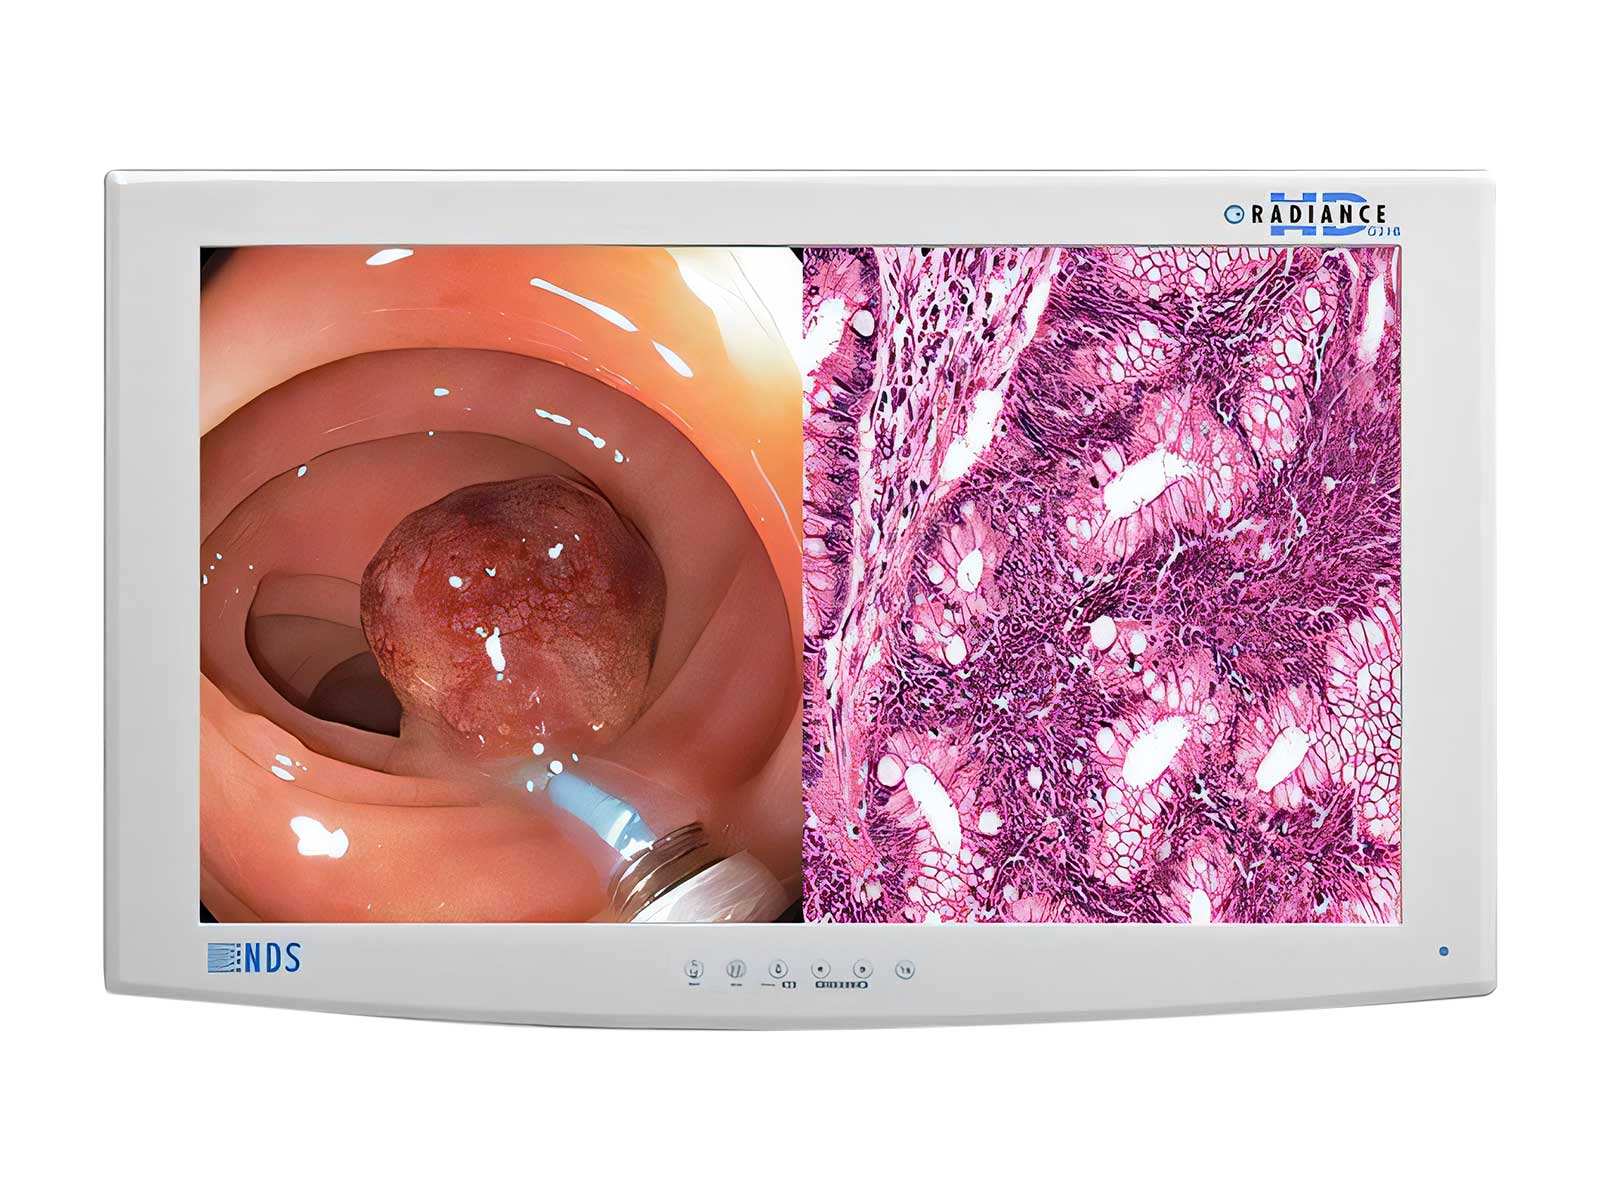 NDS Radiance SC-WX32-A1511 32" Full HD Surgical Medical Display Monitor (SC-WX32-A1511)